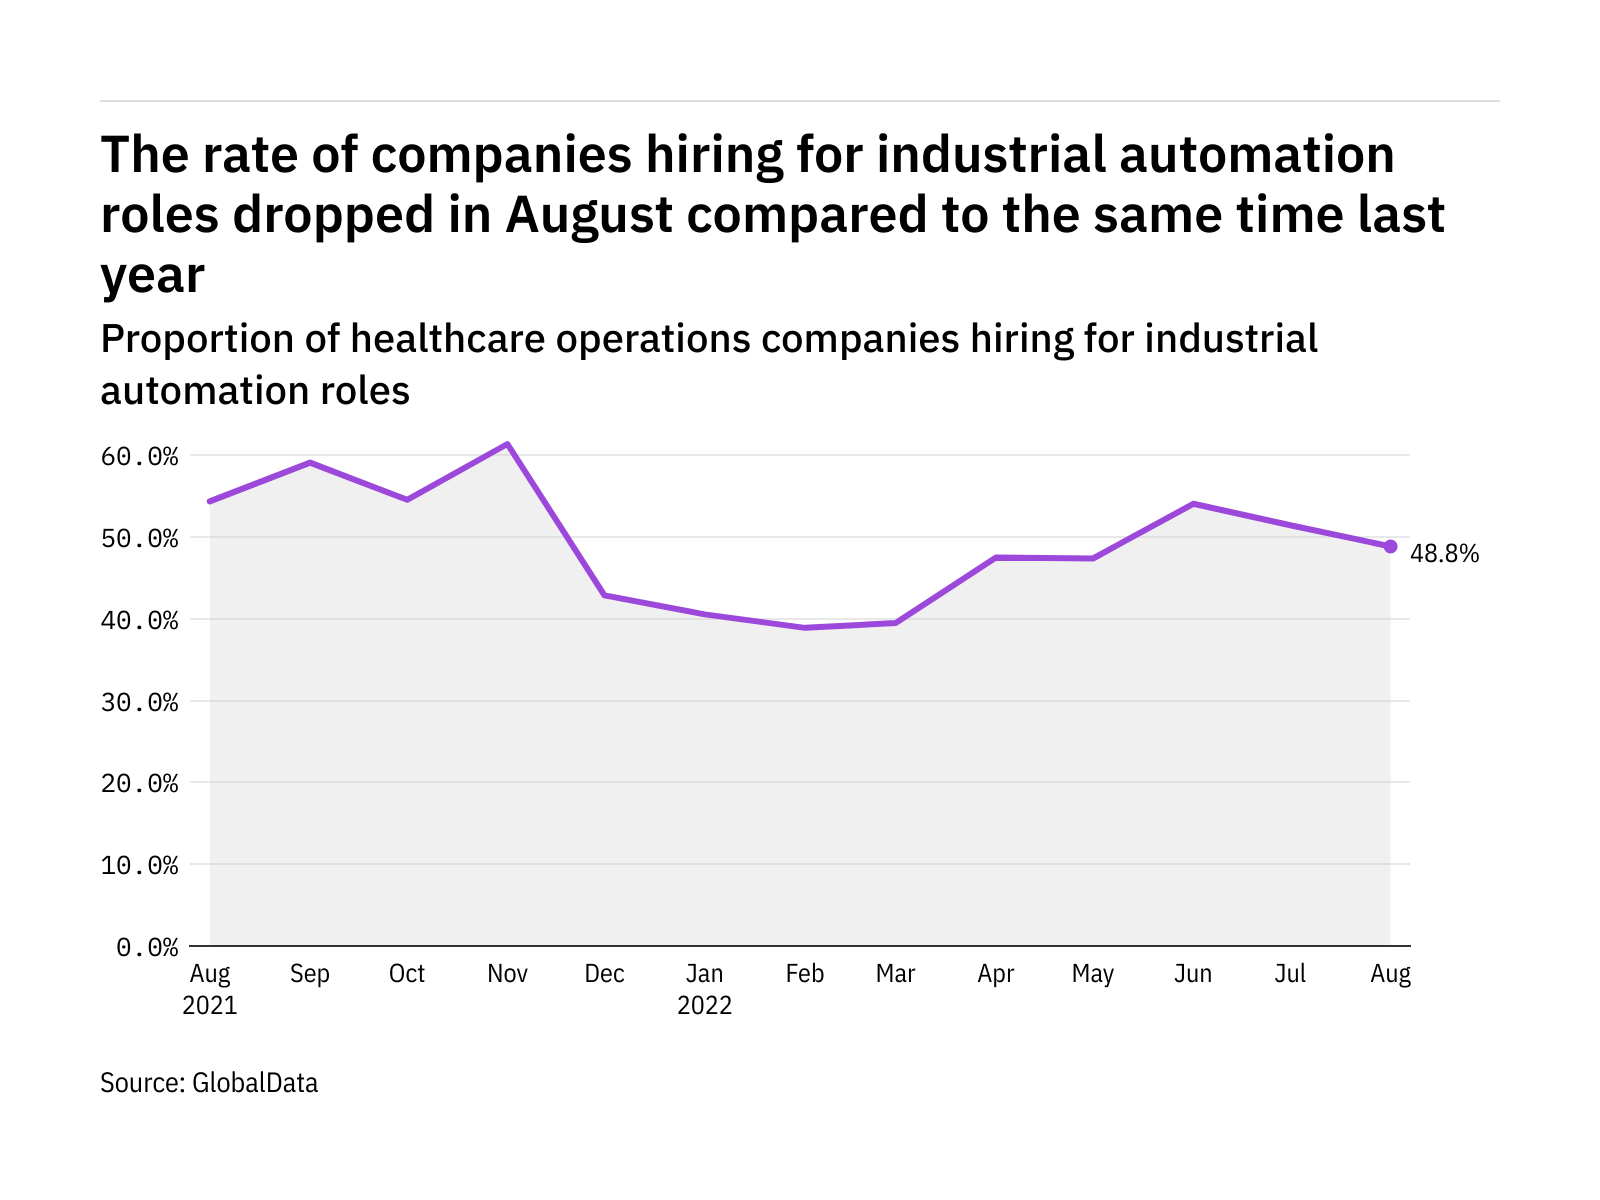 Industrial automation hiring levels in the healthcare industry dropped in August 2022